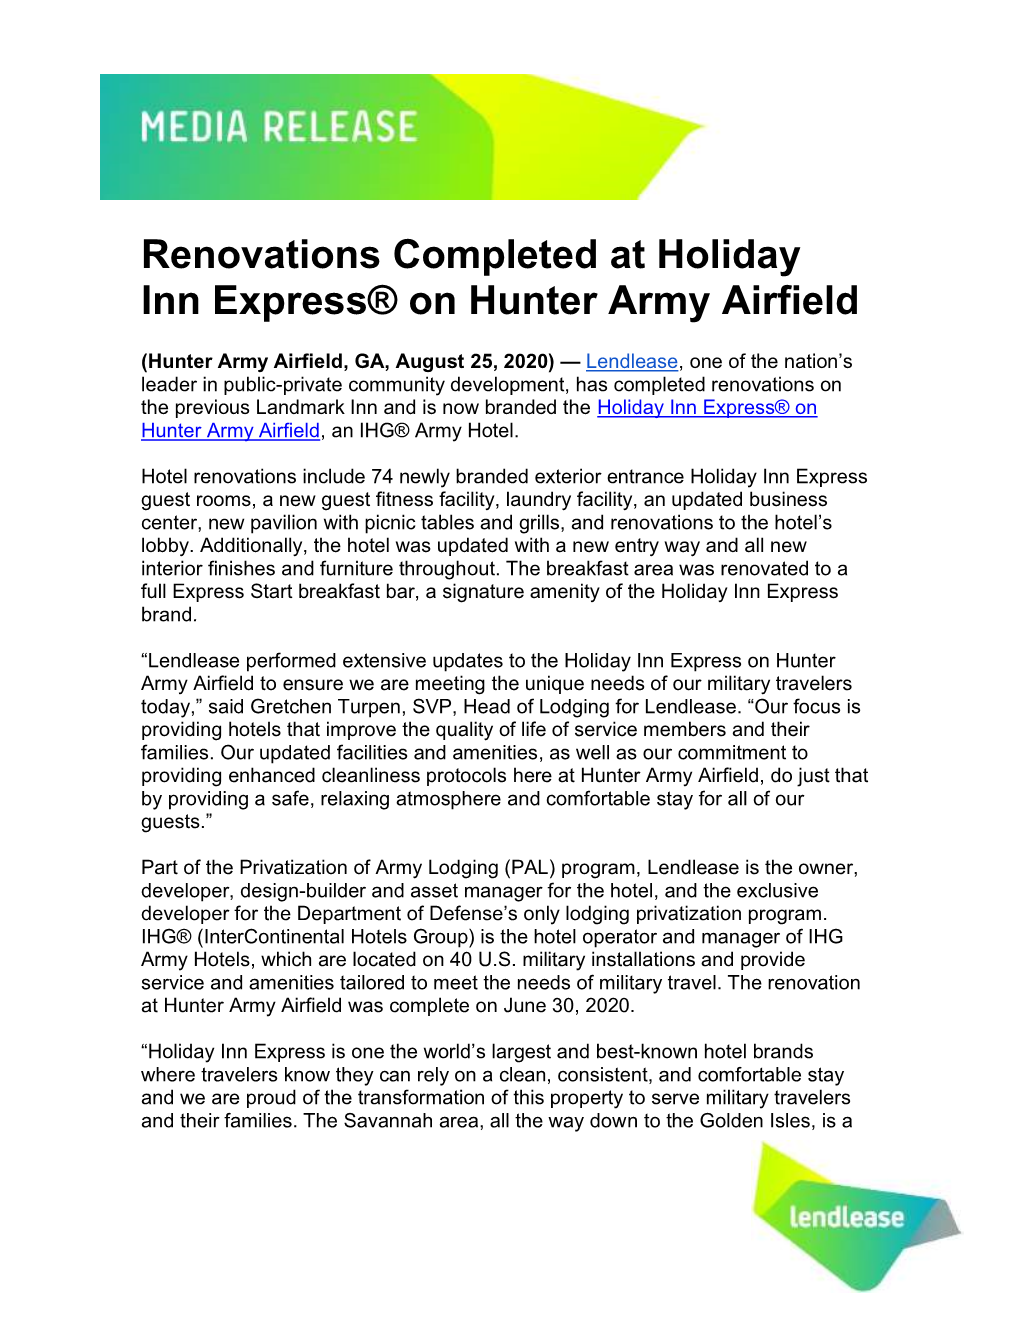 Renovations Completed at Holiday Inn Express® on Hunter Army Airfield